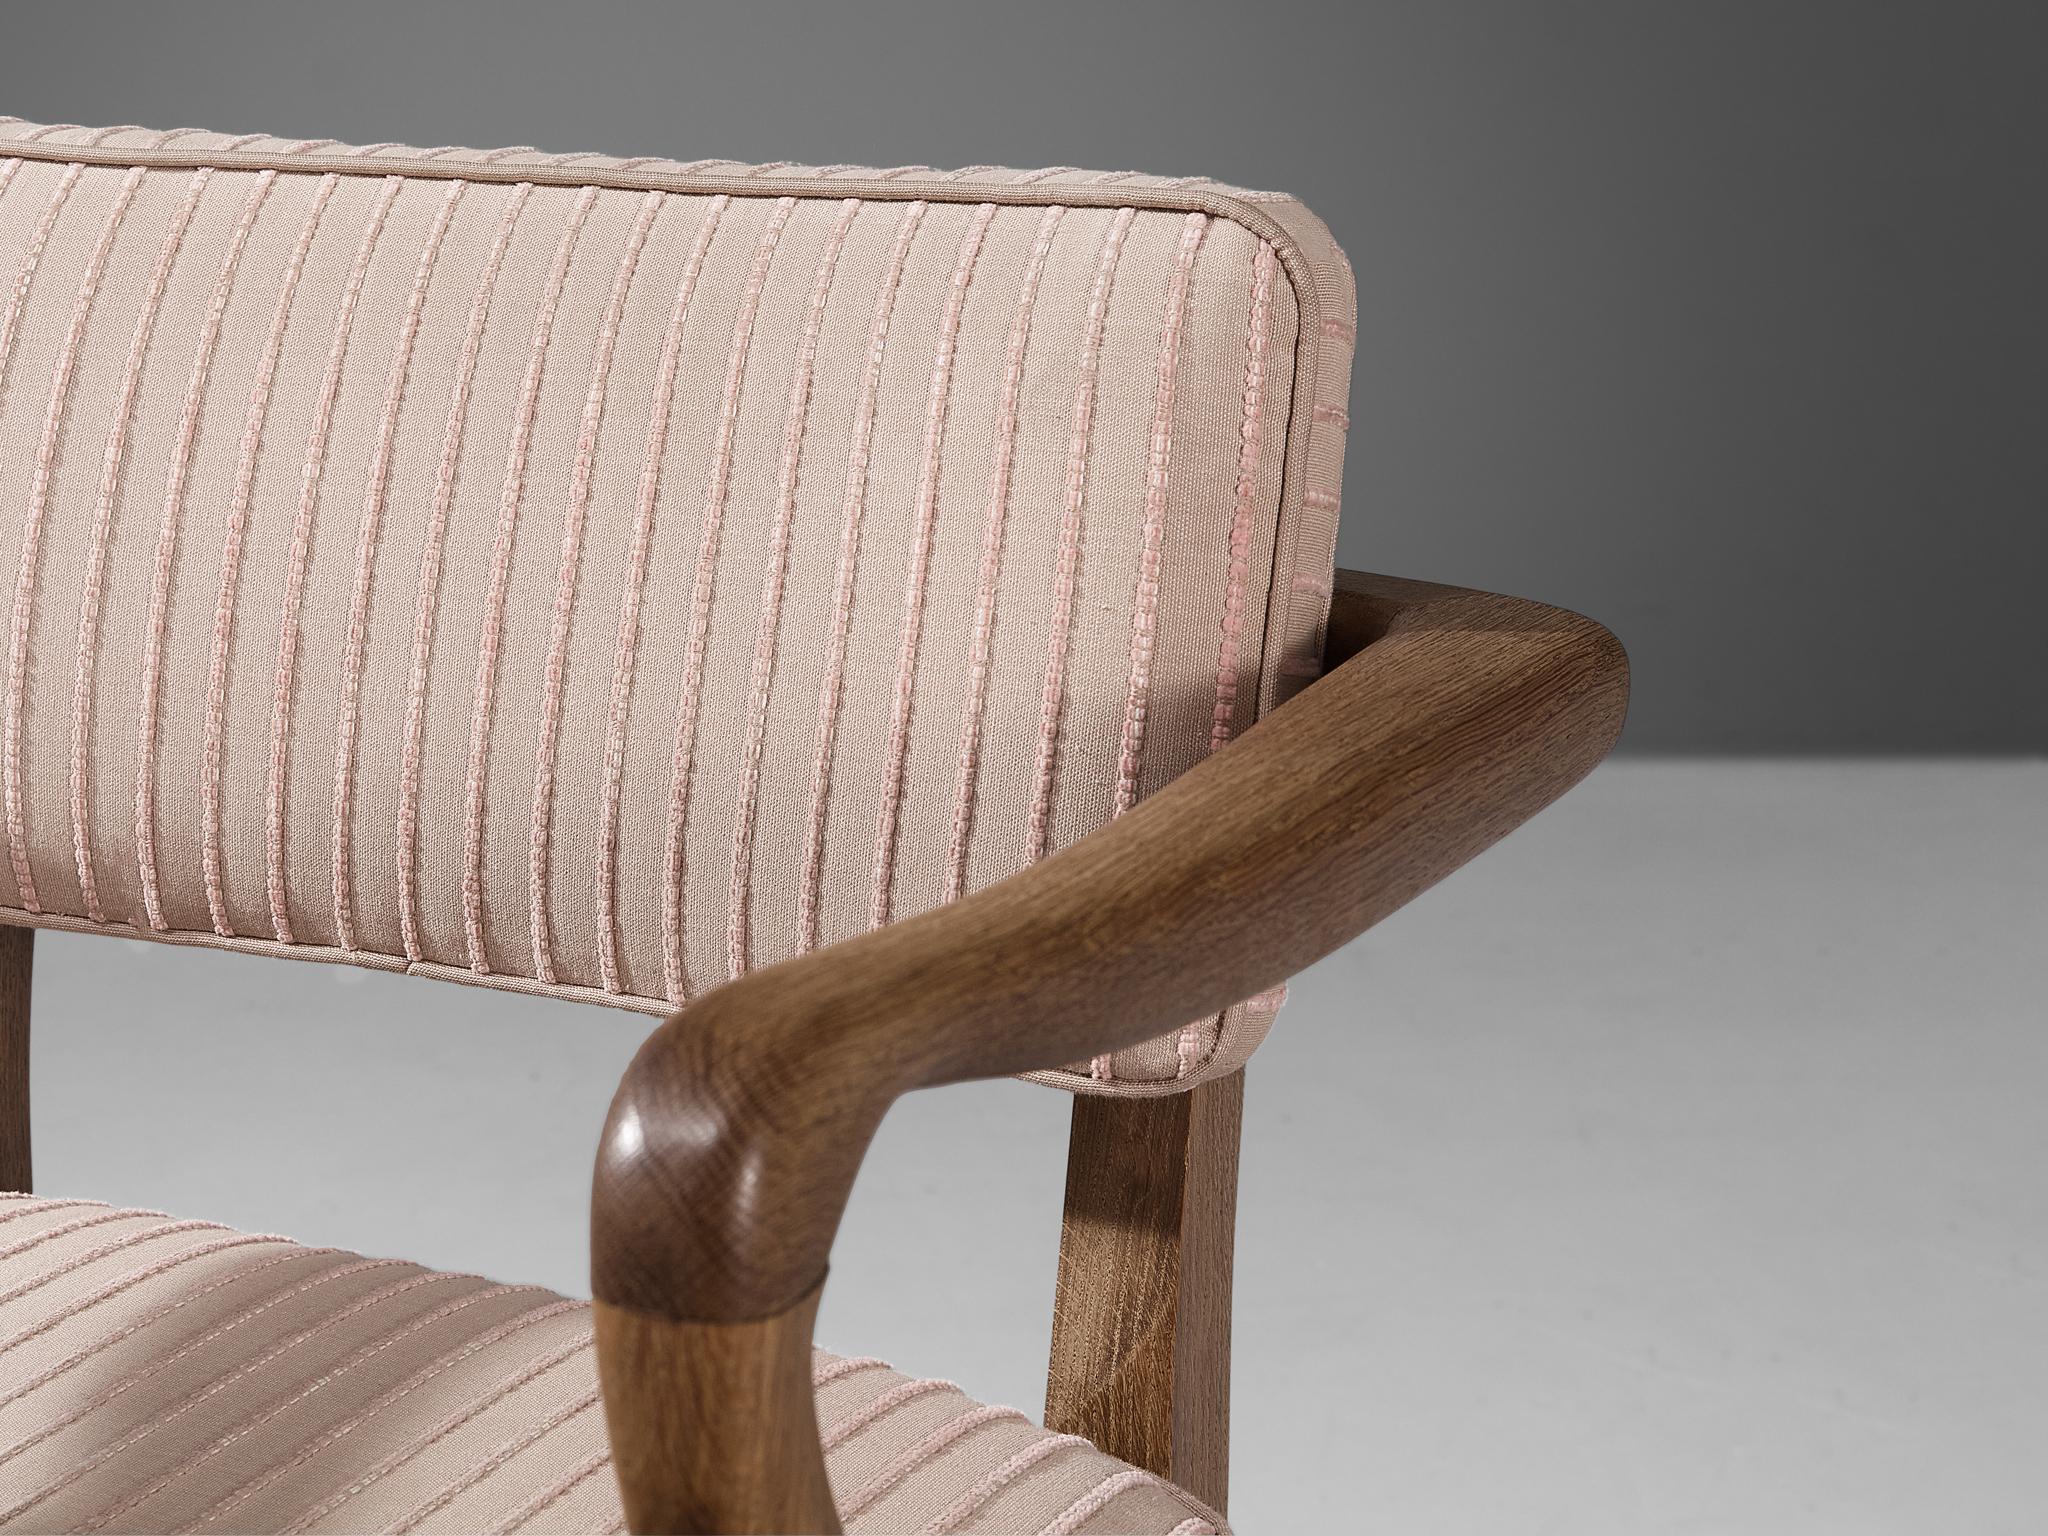 Guillerme & Chambron 'Denis' Armchair in Oak and Soft Pink Upholstery 1